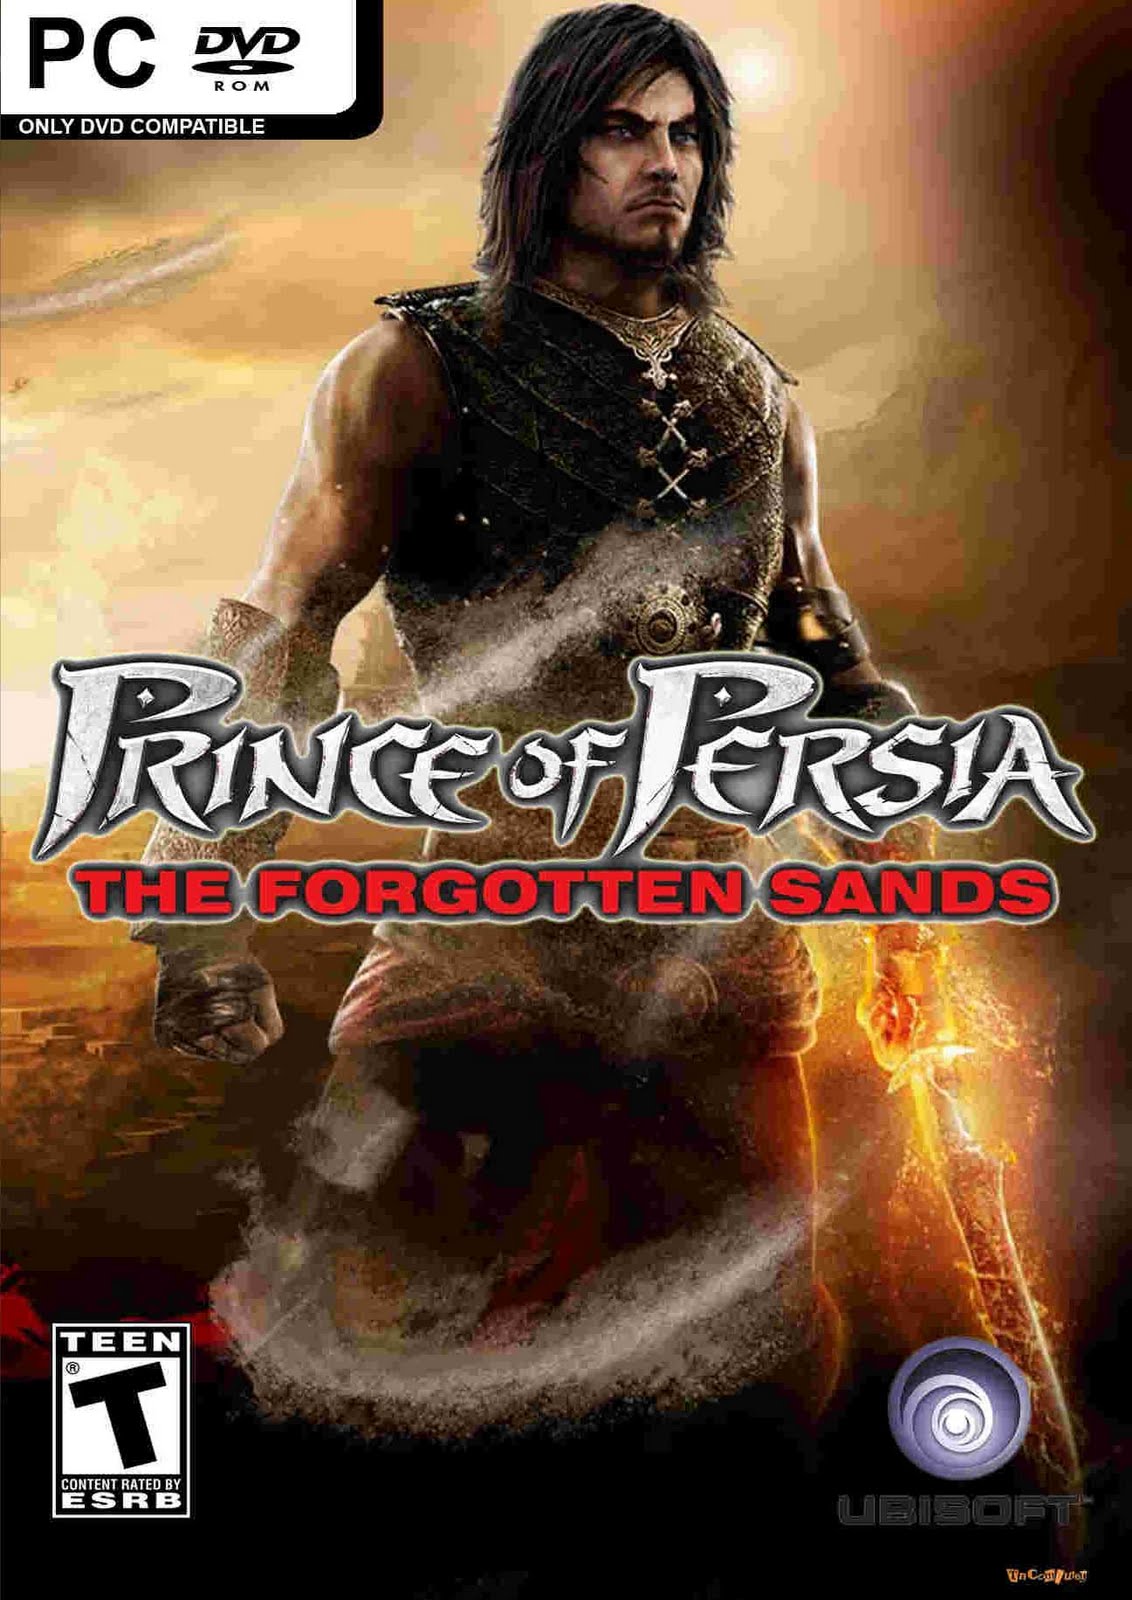 Prince of persia the forgotten sands latest crack fix